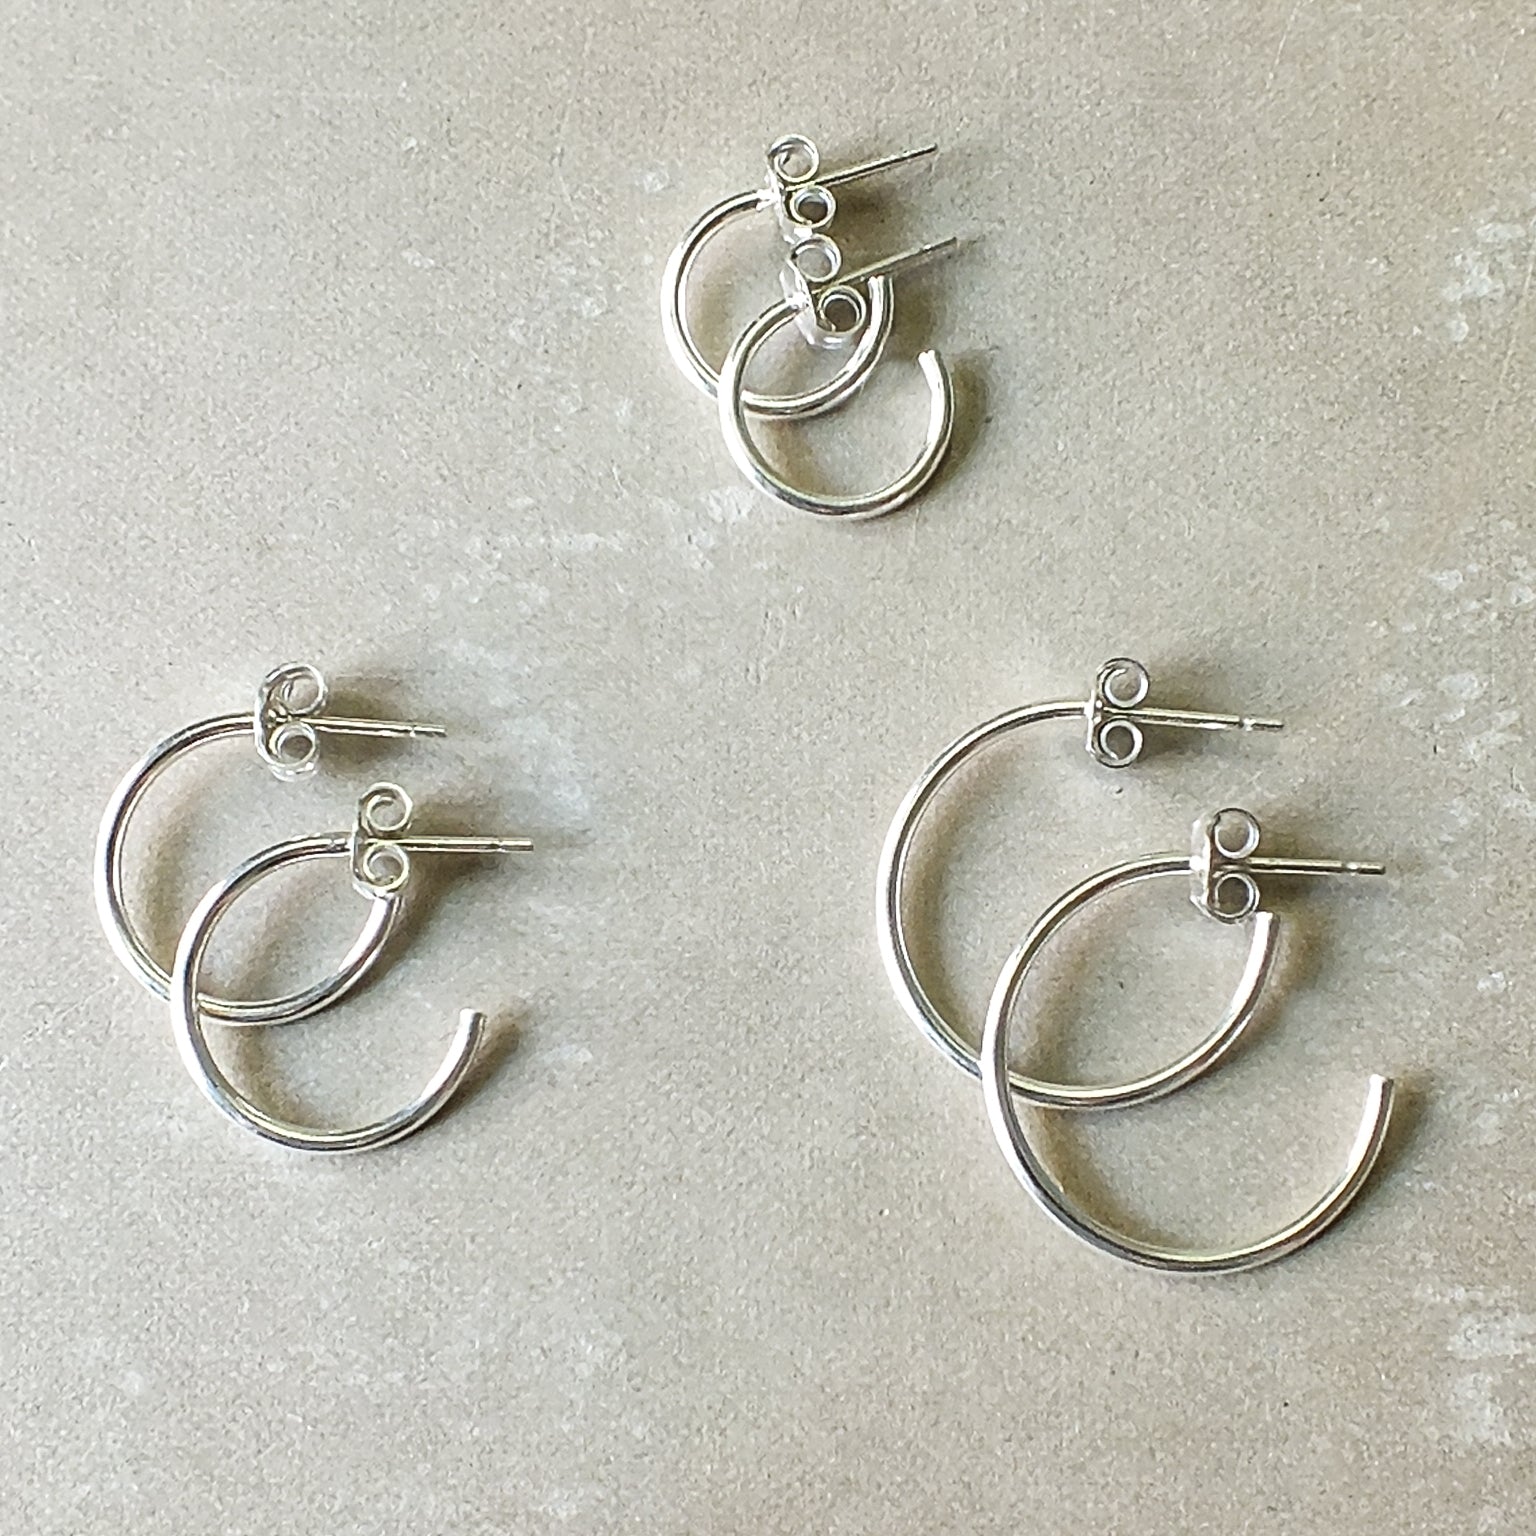 Four Becoming Jewelry small Open Hoop Earrings with a unique layered design on a gray background, crafted from sterling silver.